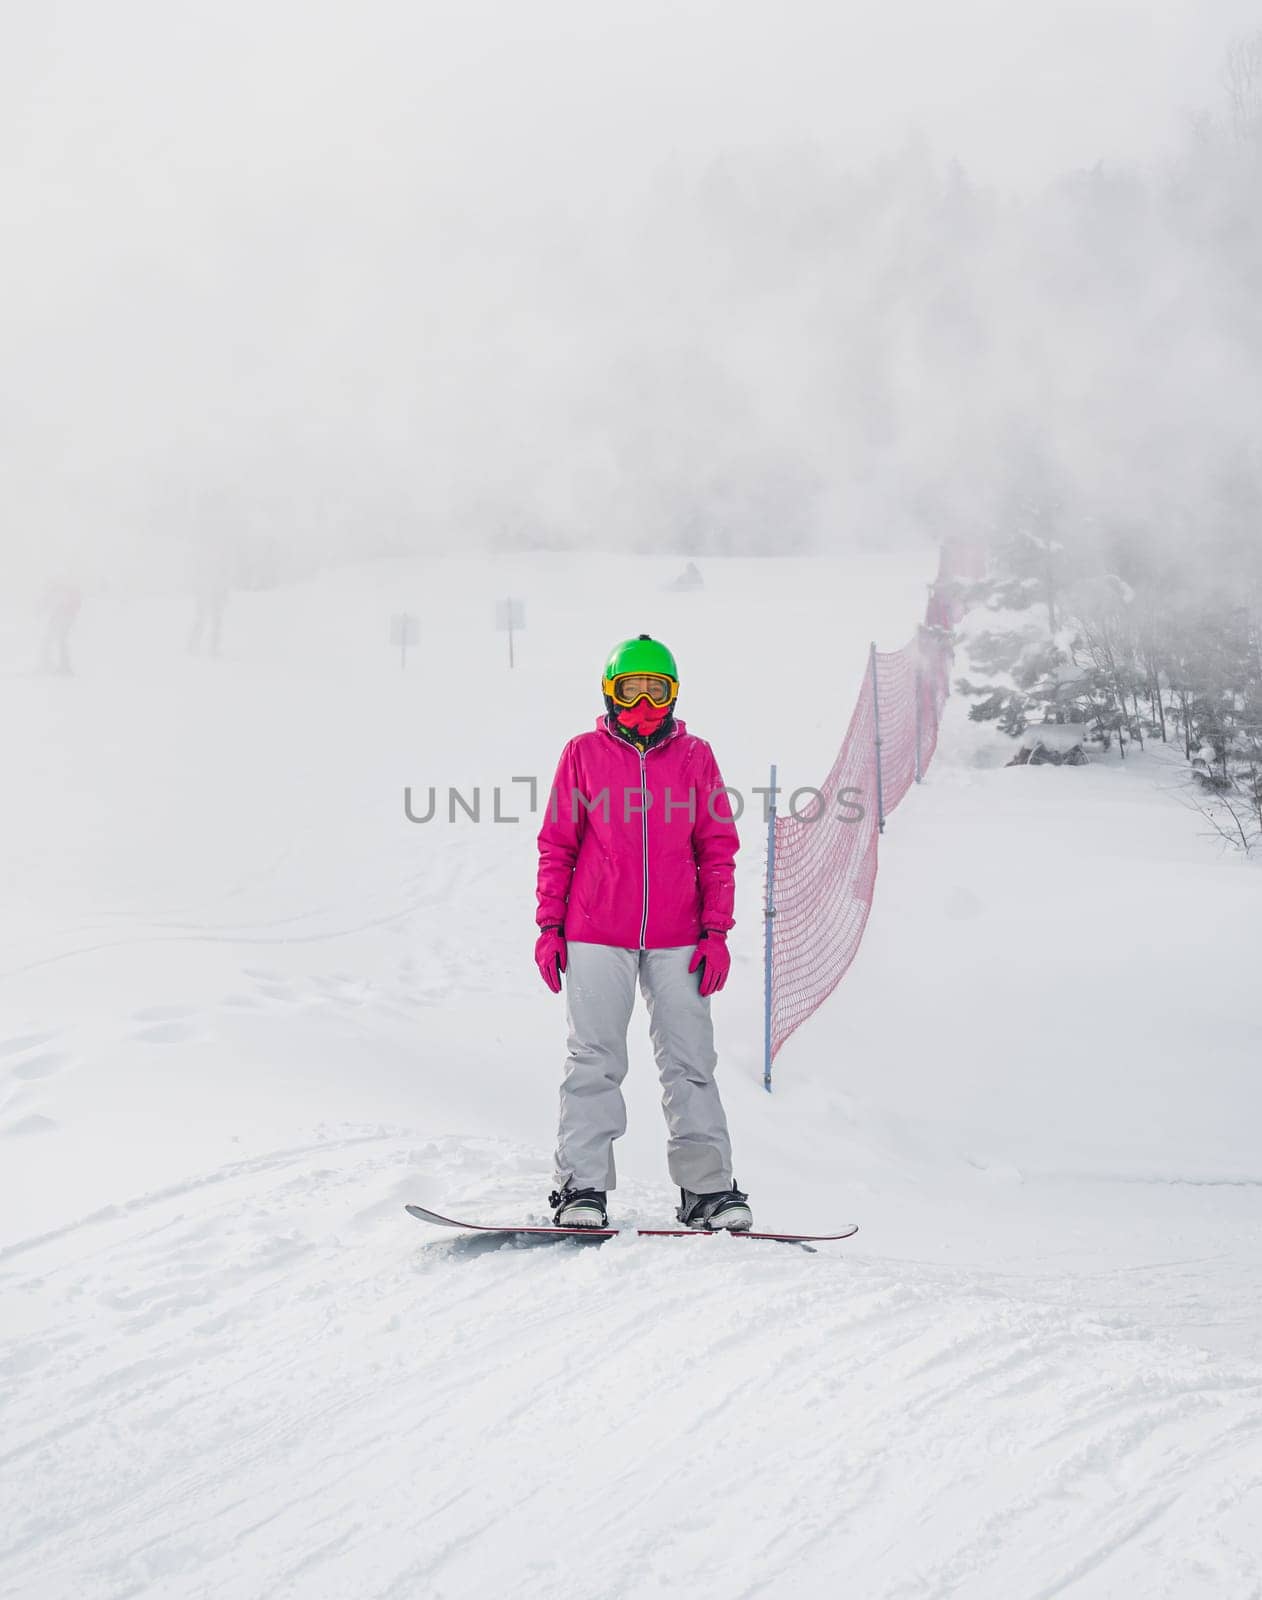 A snowboarder wearing a bright pink jacket and green helmet stands on a misty, snow-covered slope. The scene is set in a winter landscape with some trees and a safety net in the background. by Busker